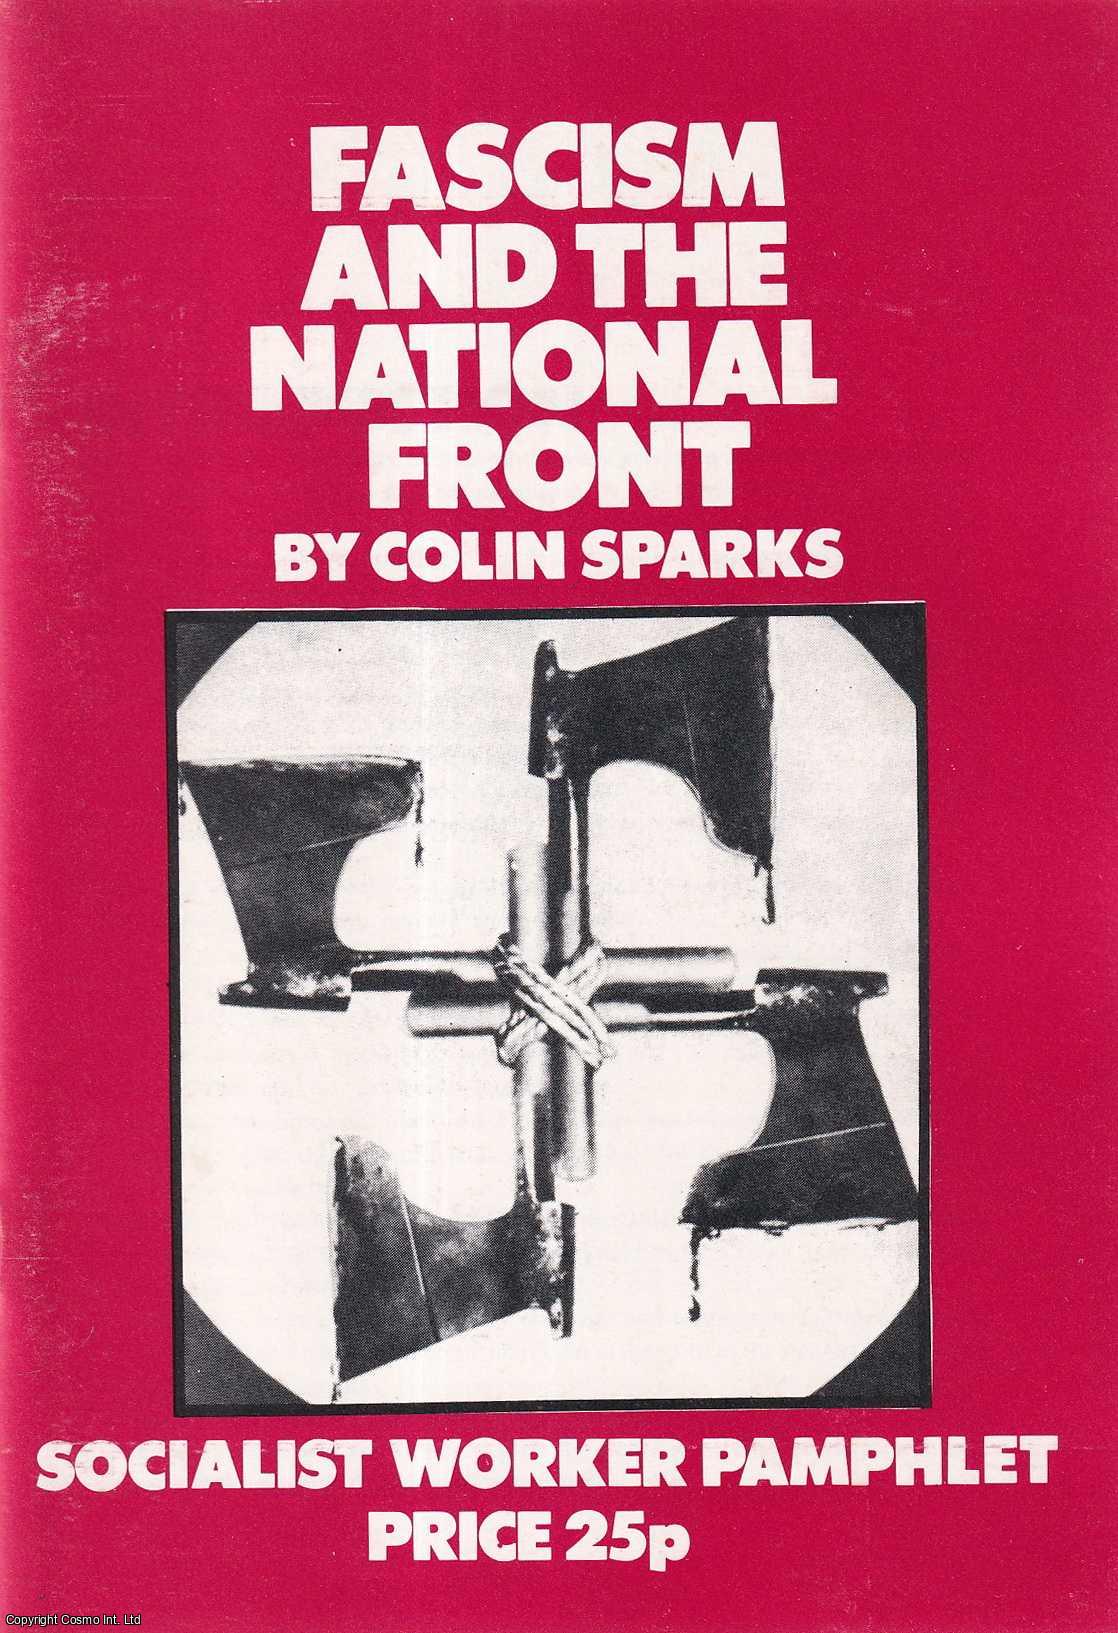 Colin Sparks - Facism and the National Front. A Socialist Worker Pamphlet.